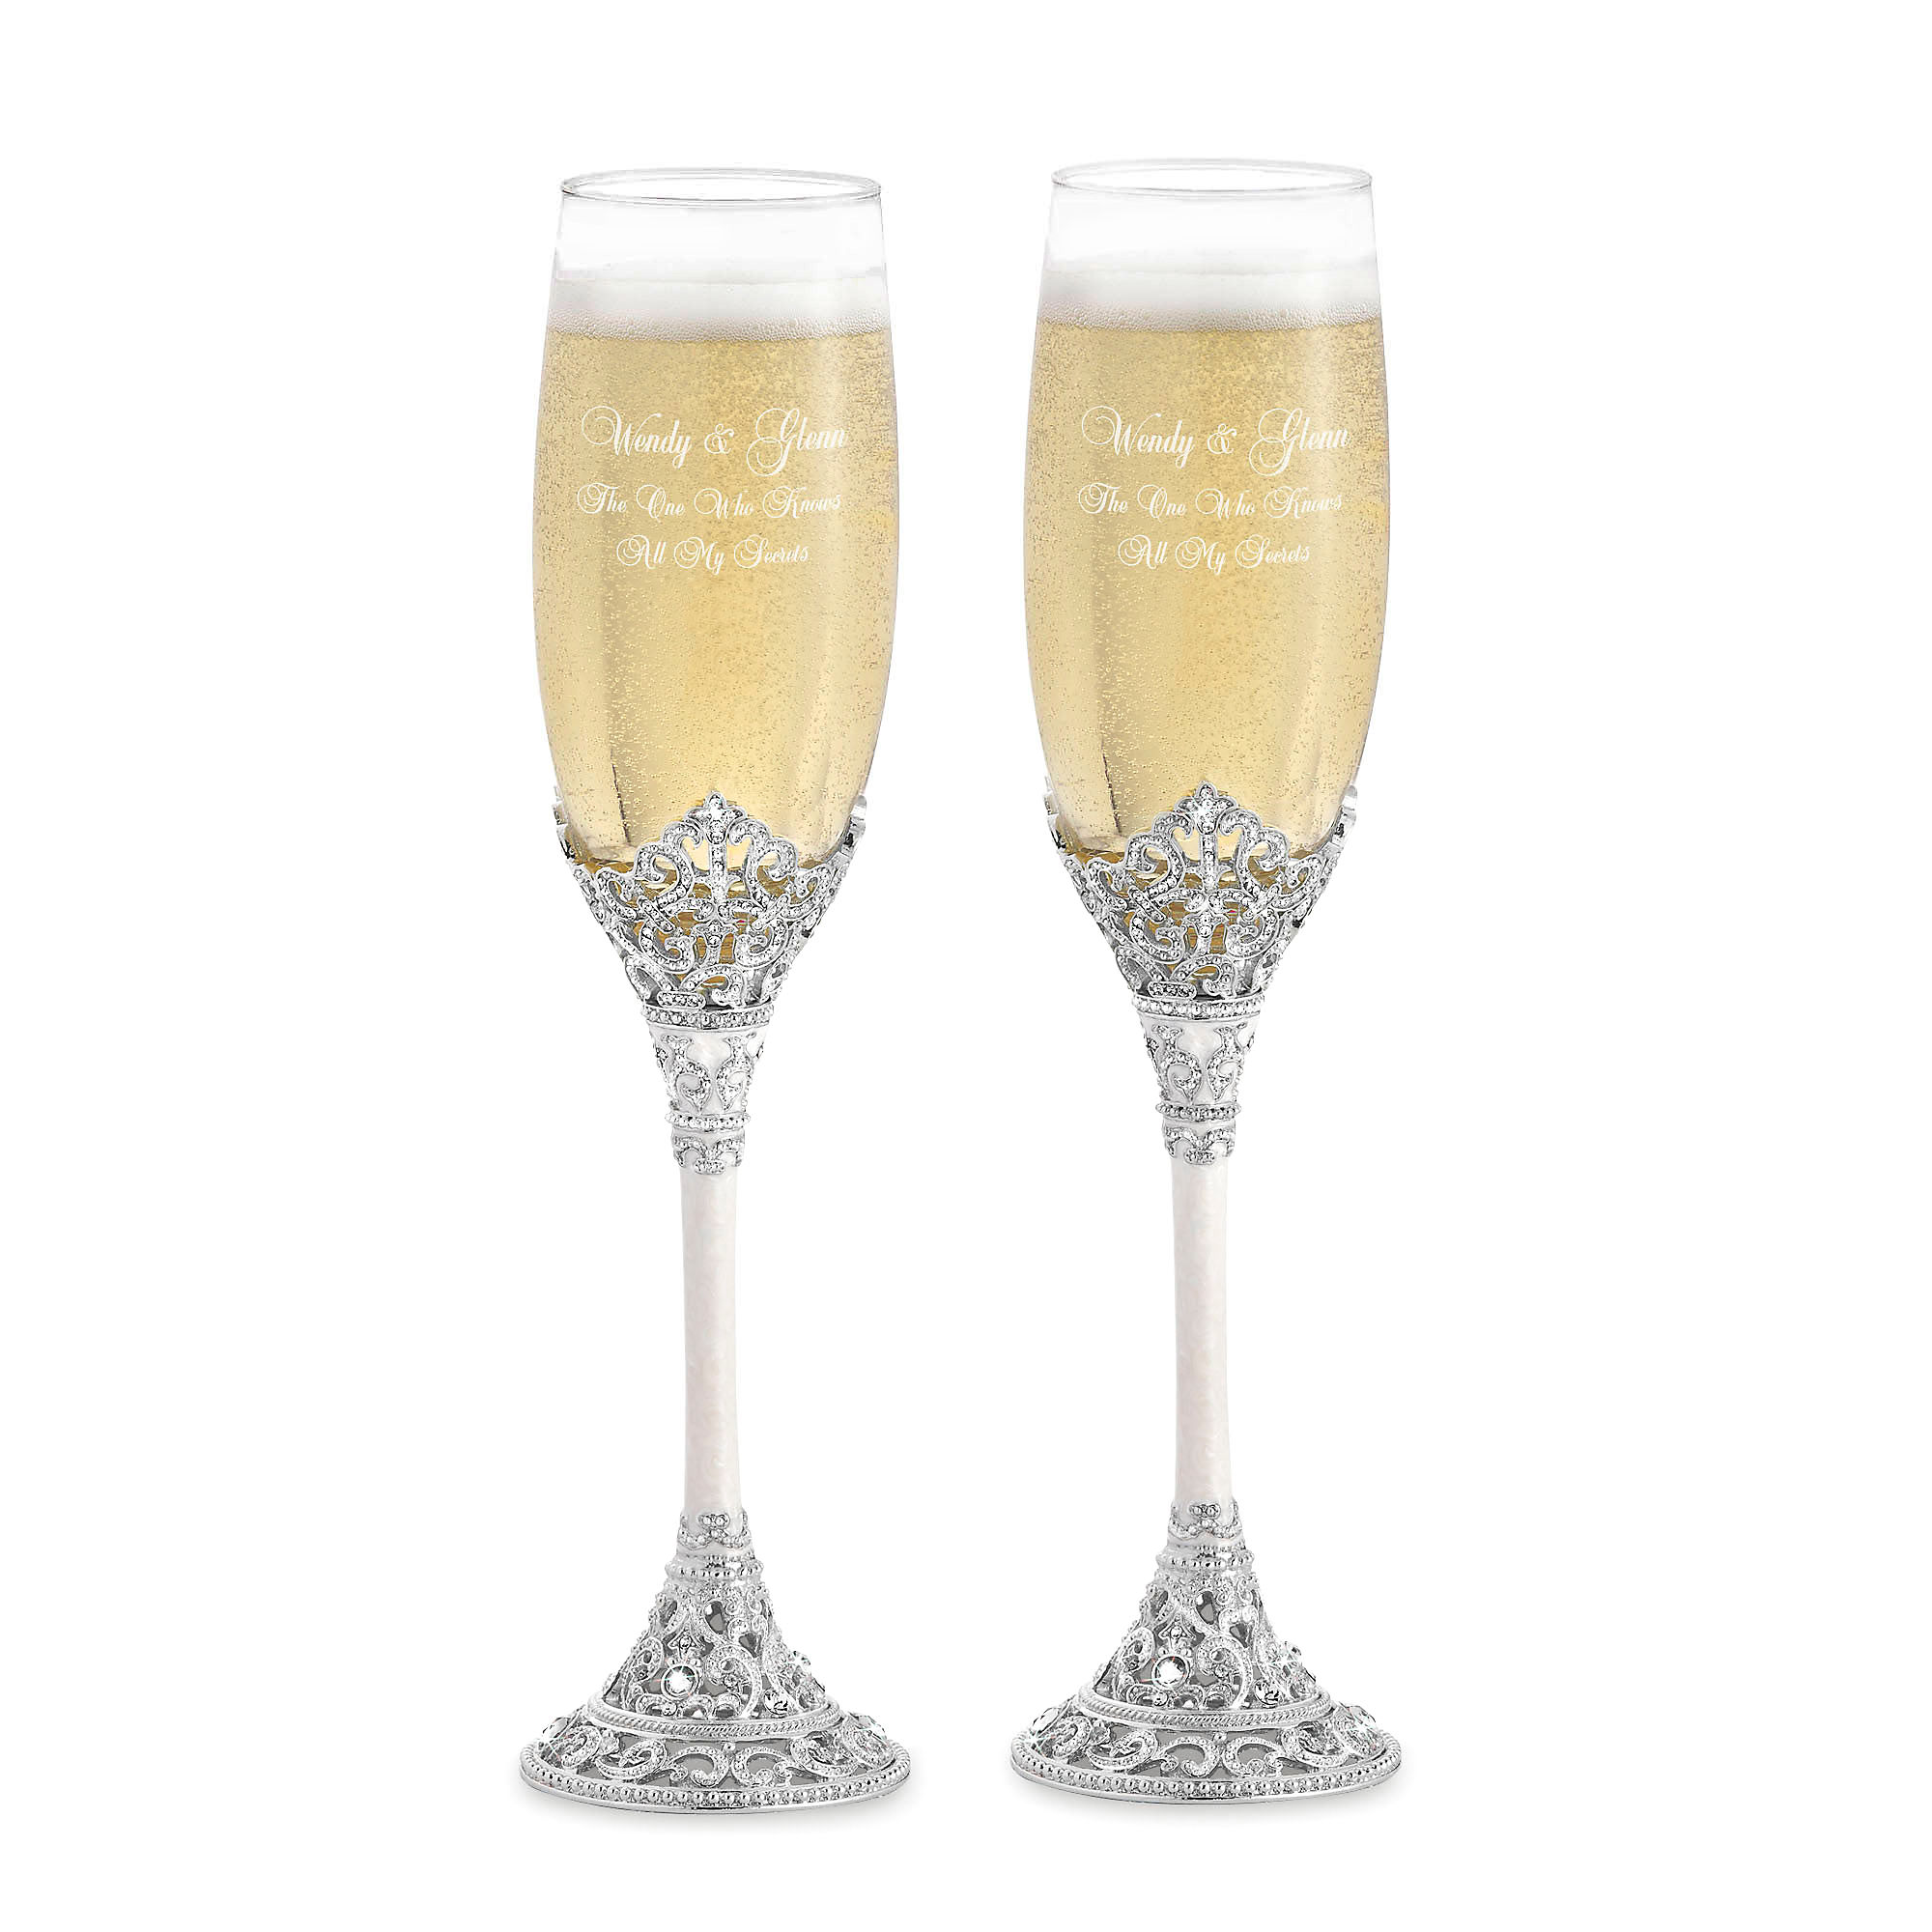 Engraved FREE Silver Wedding Toasting Flute Glasses With Crystal Accents 